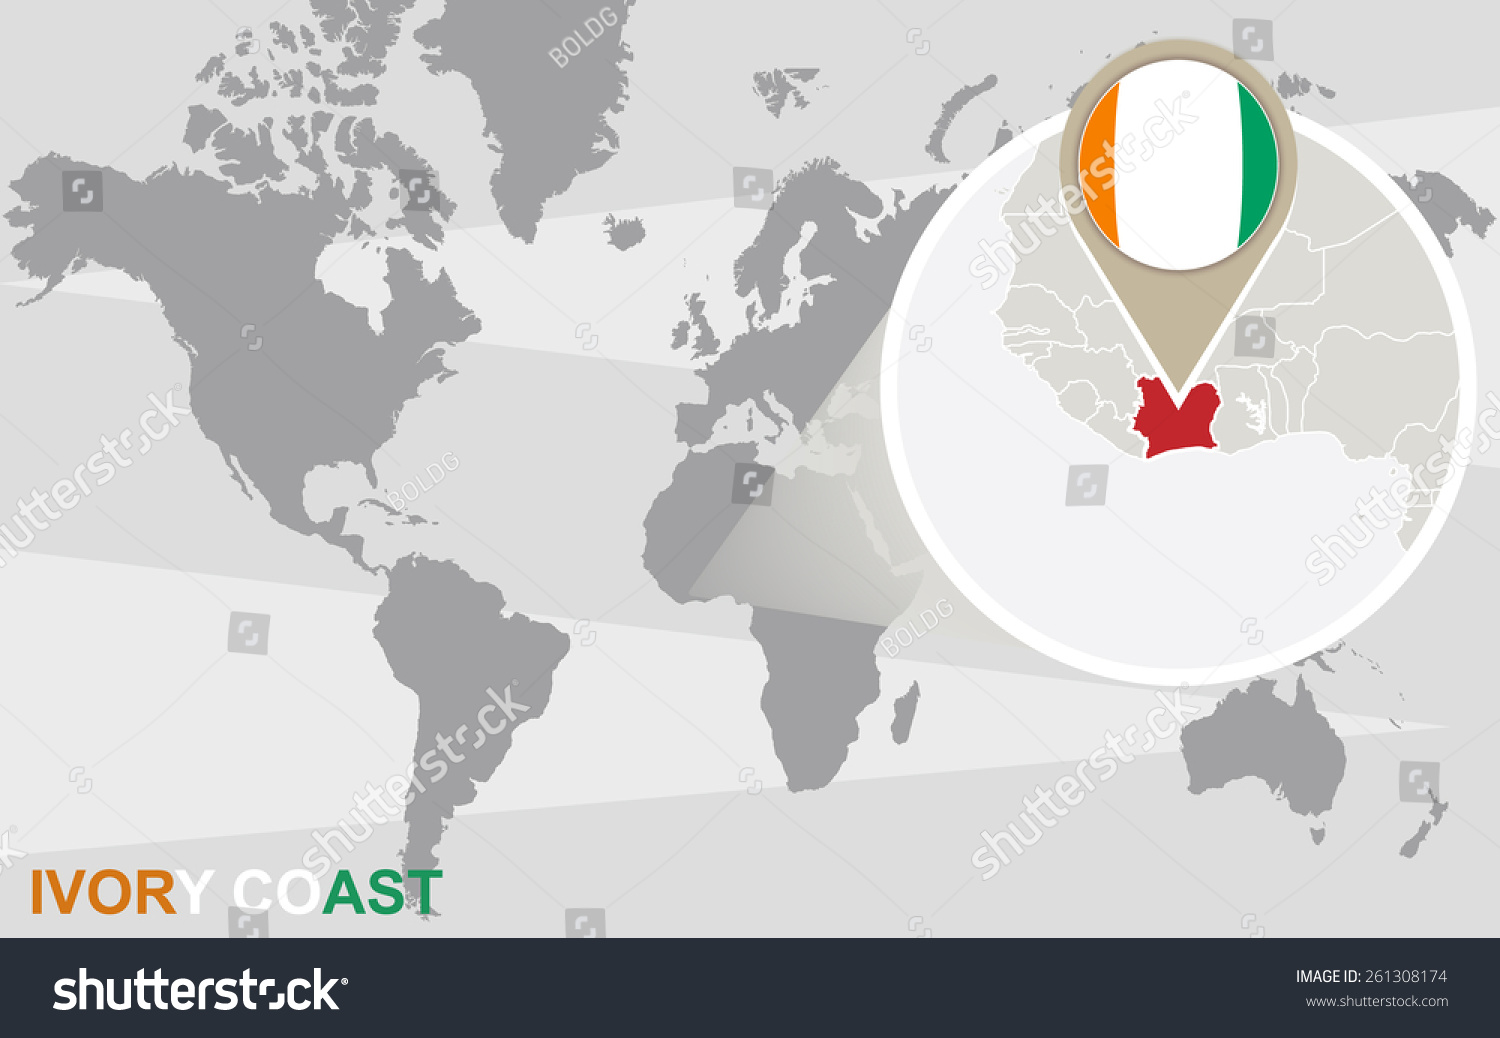 Stock Vector World Map With Magnified Ivory Coast Ivory Coast Flag And Map 261308174 